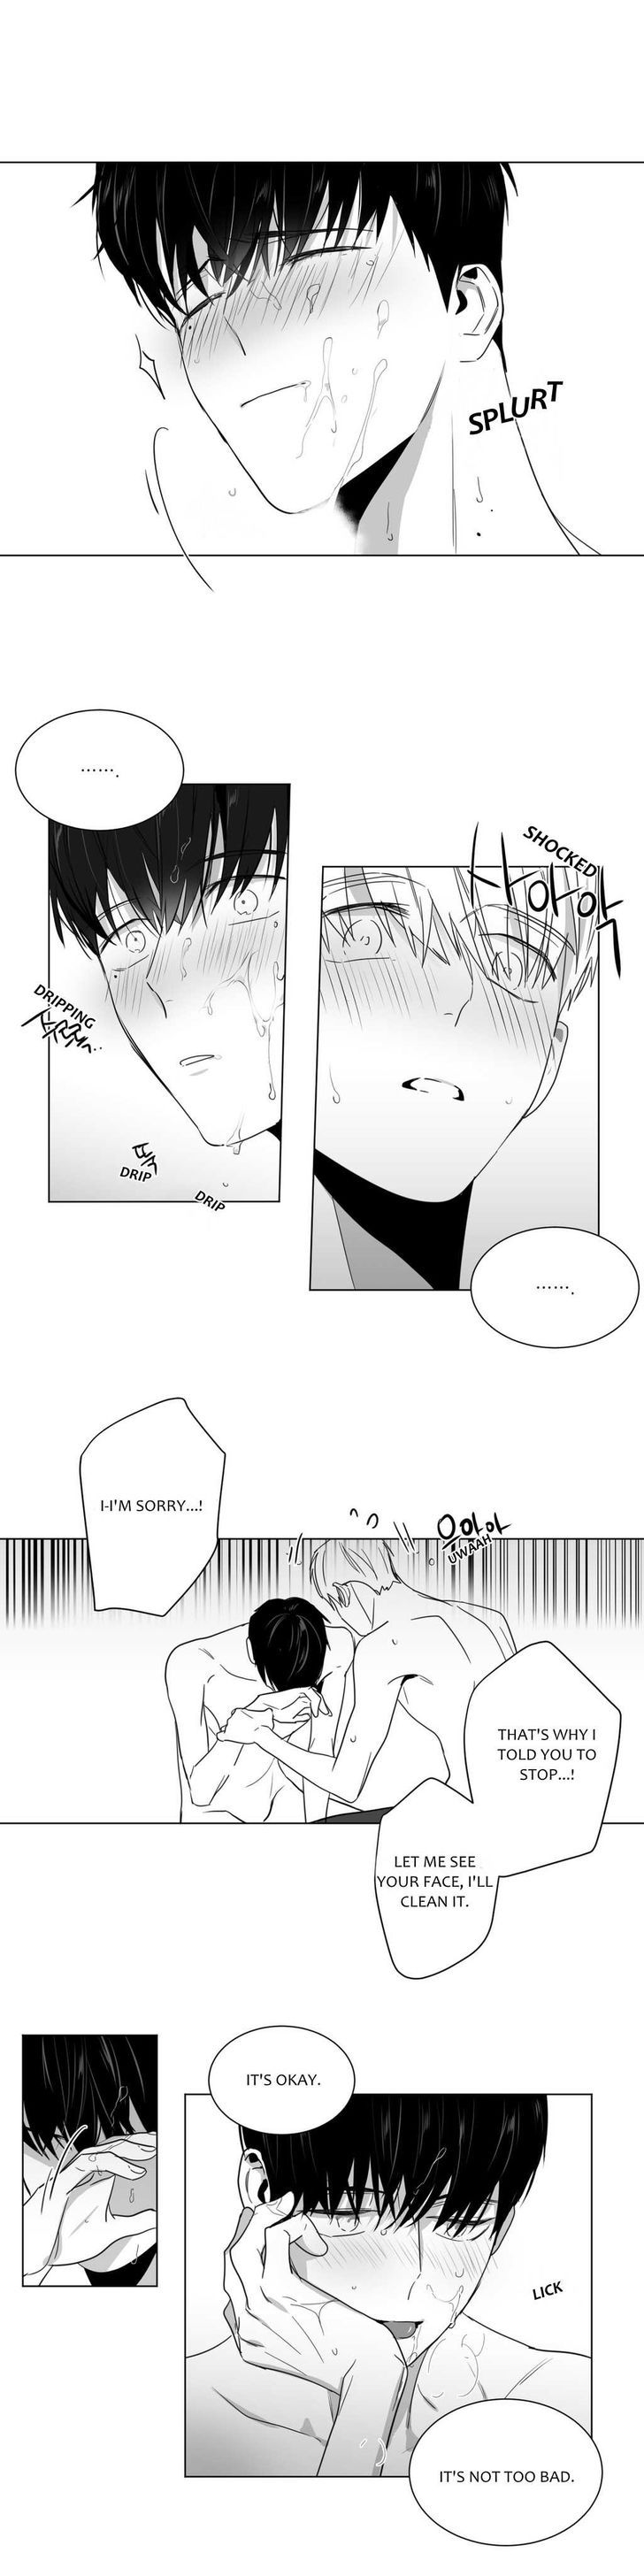 Lover Boy (Lezhin) Chapter 015 page 10